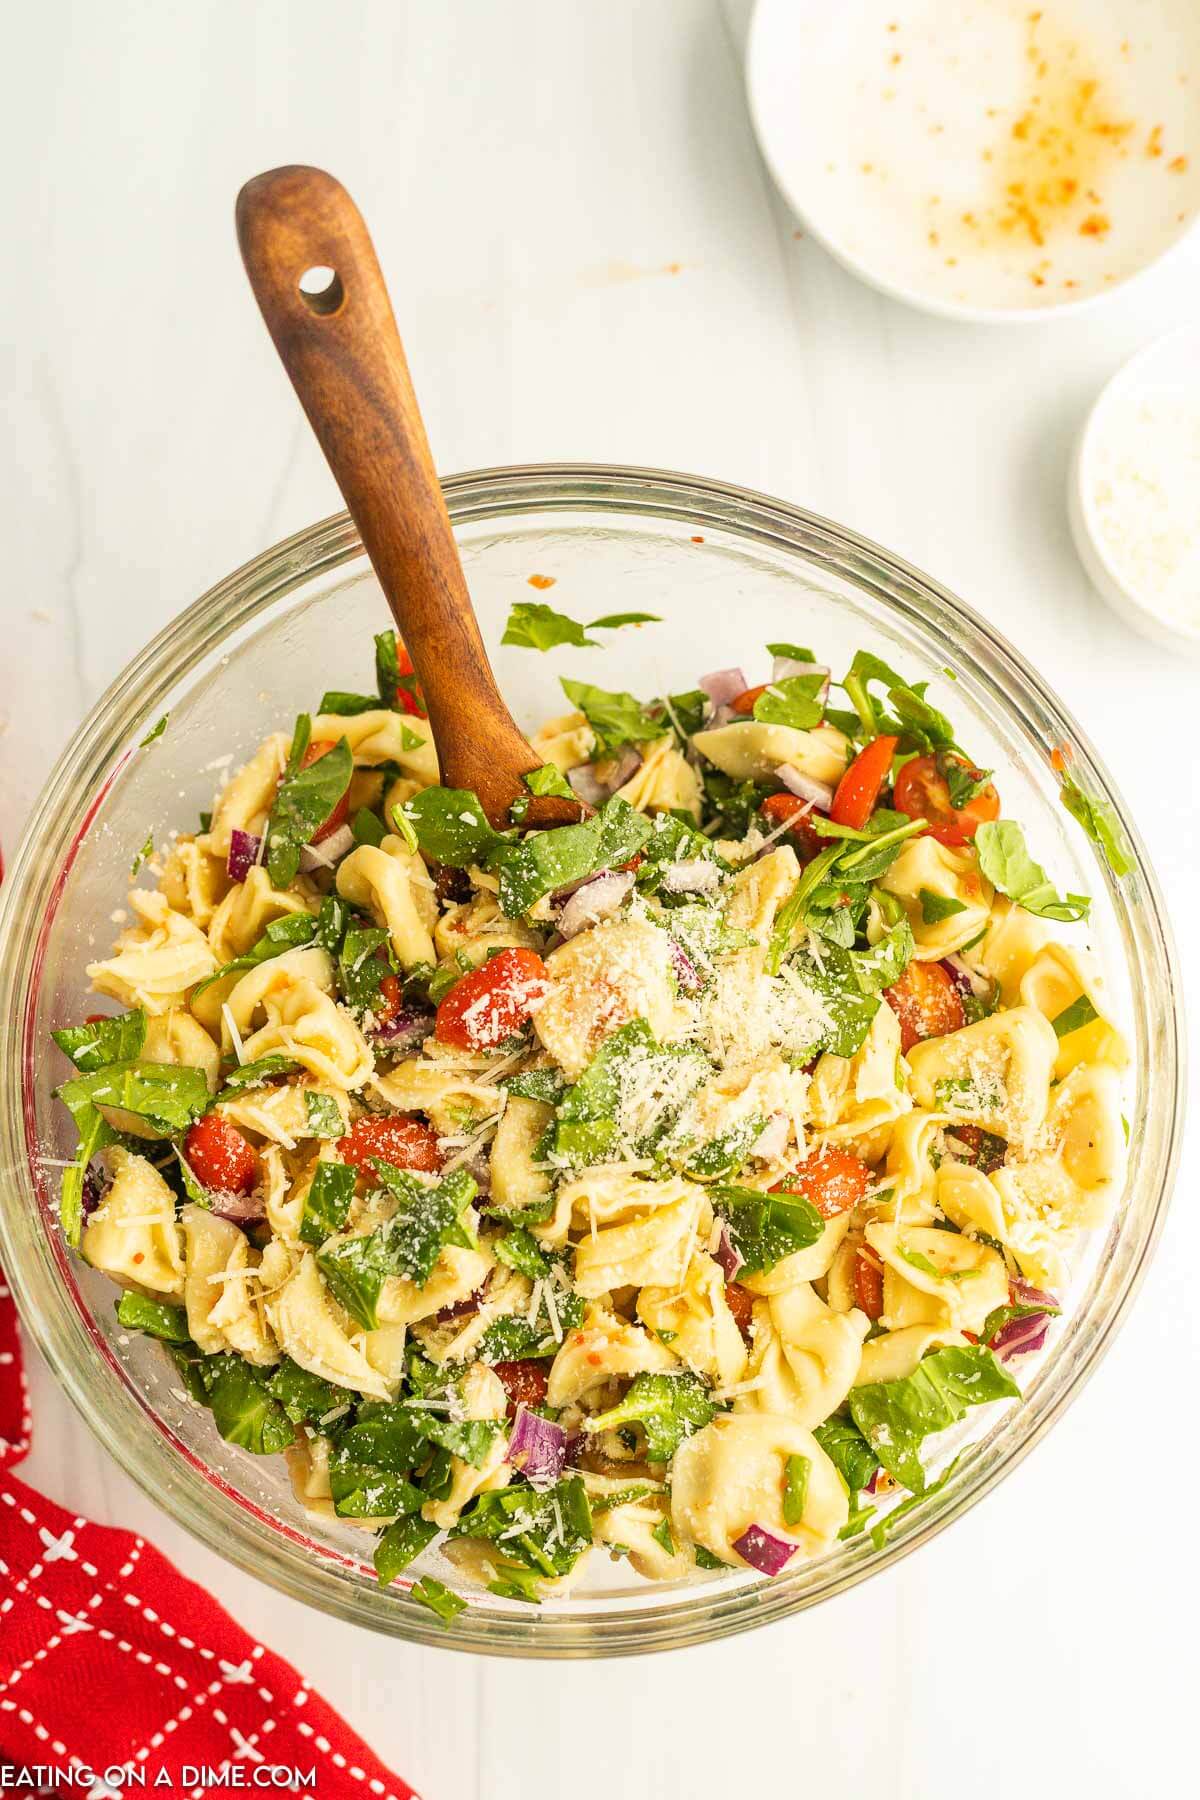 Topping the salad with shredded parmesan cheese